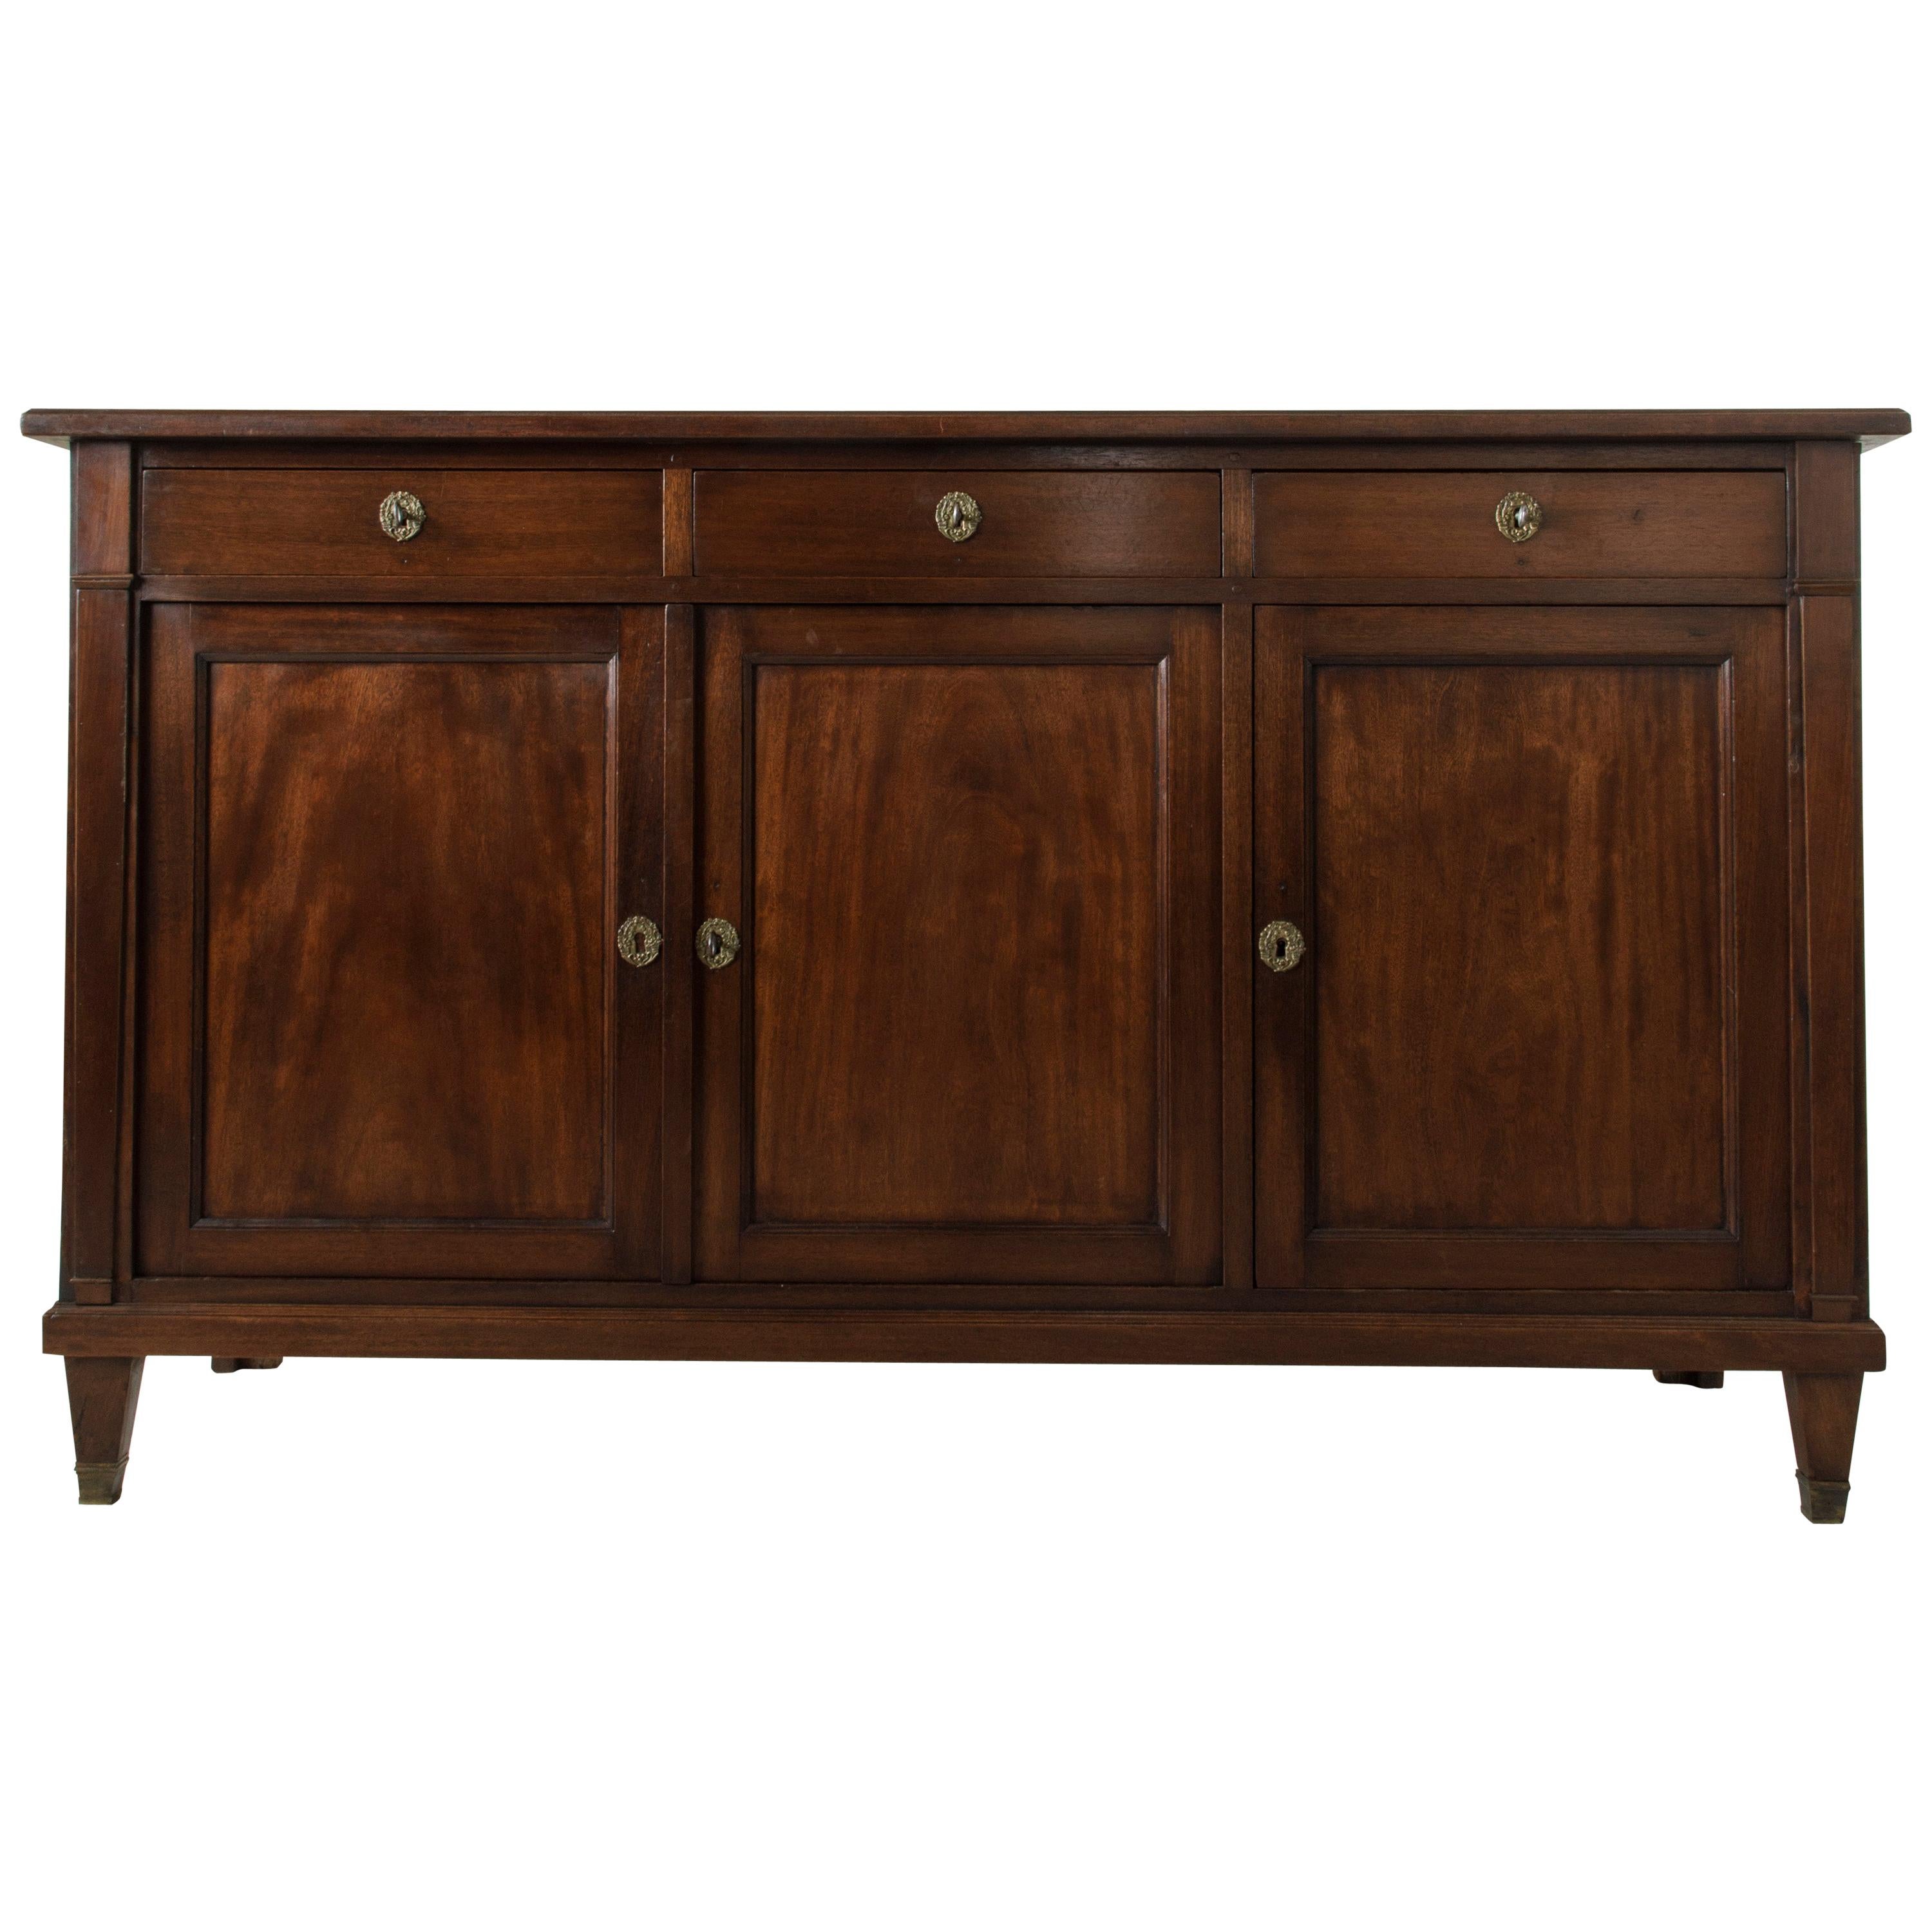 Late 19th Century French Directoire Style Mahogany Enfilade, Sideboard, Buffet